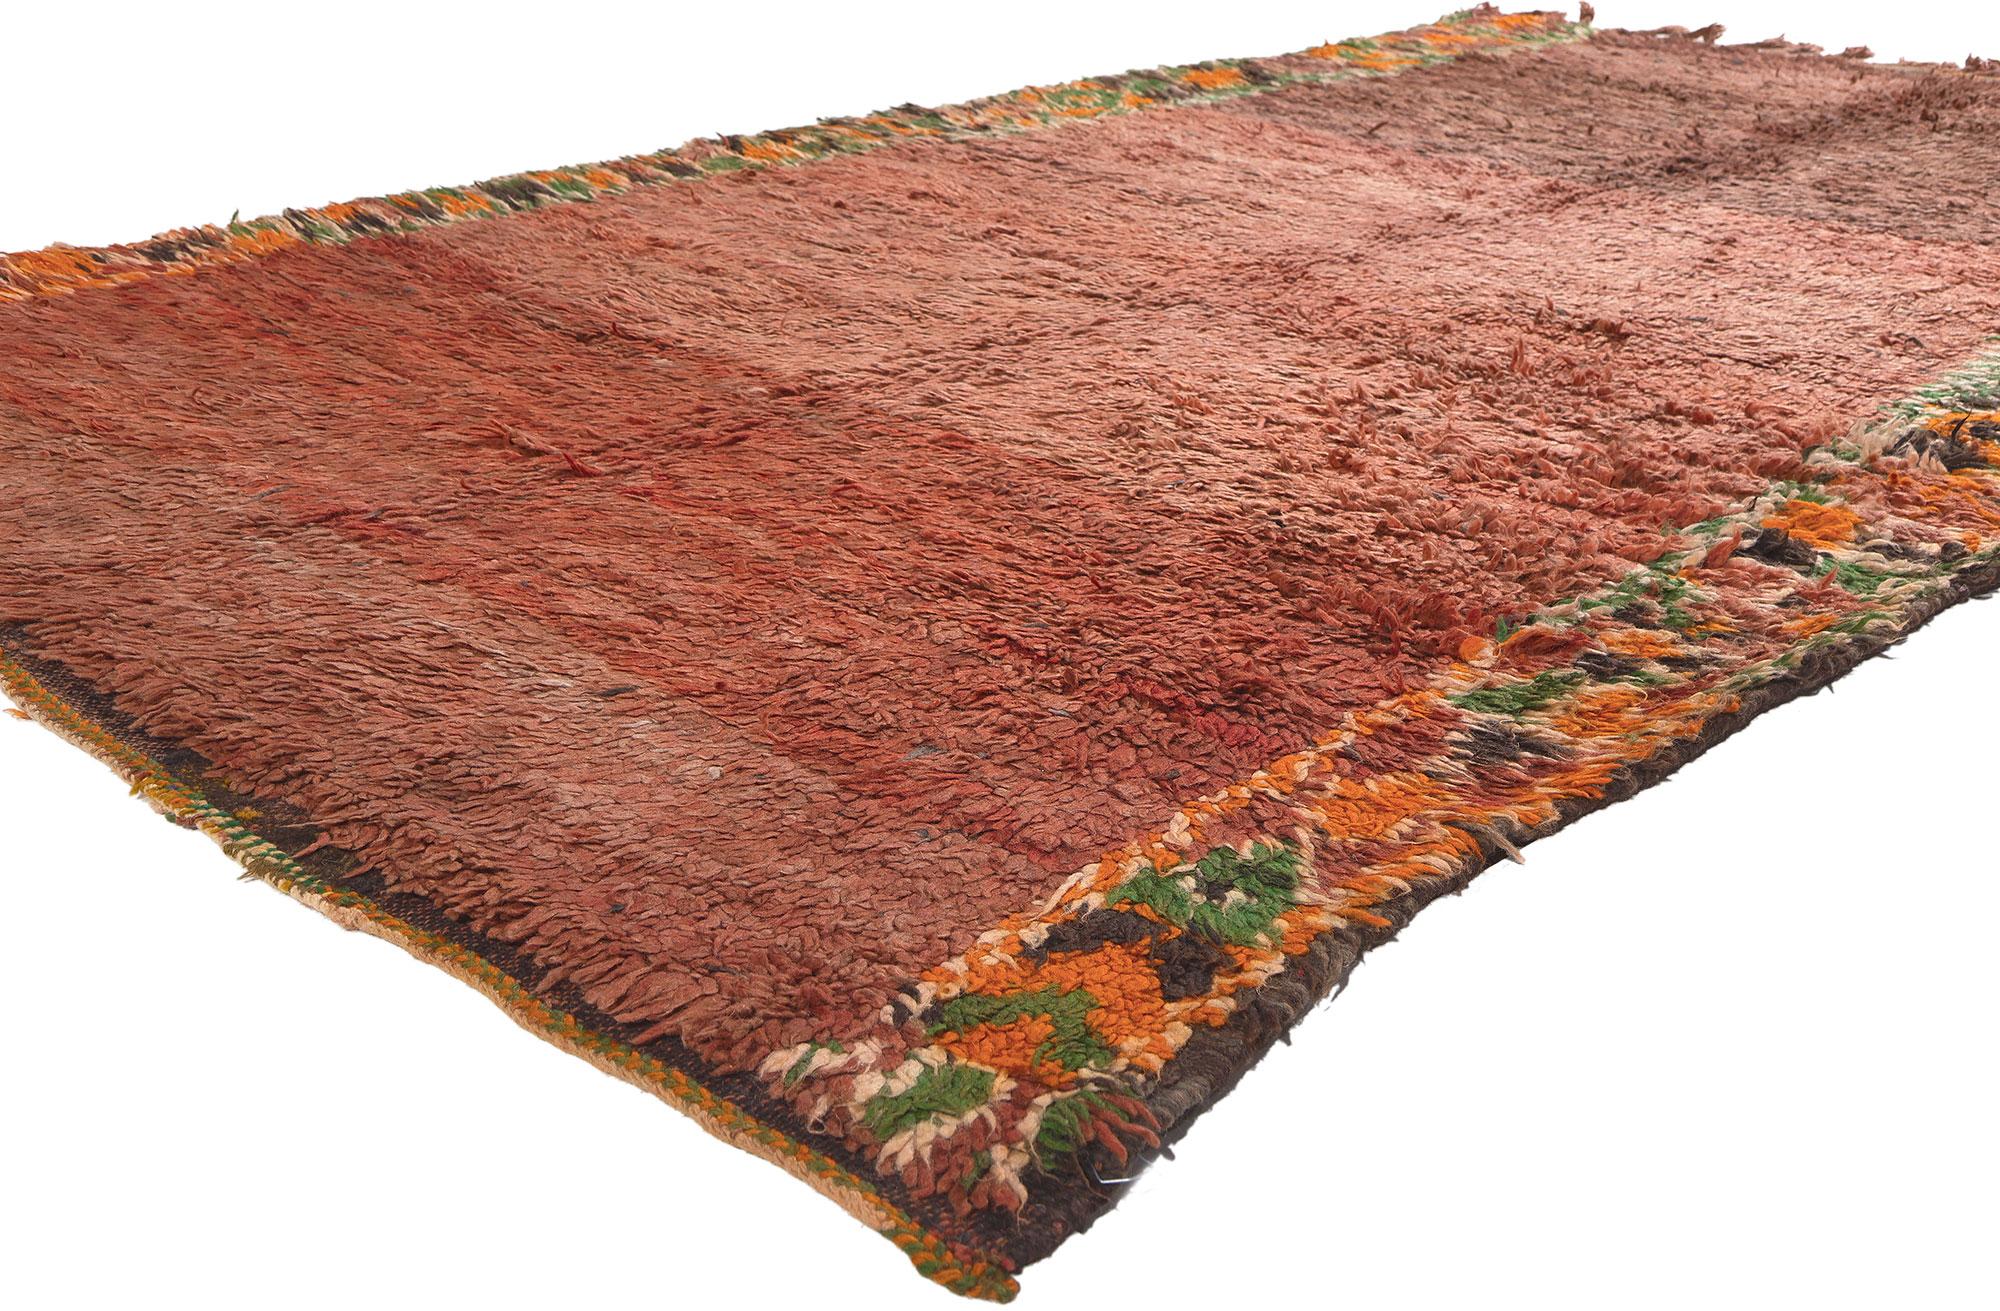 20895 Vintage Beni MGuild Moroccan Rug, 05'05 x 09'02.

Biophilic Design meets tribal enchantment in this hand knotted wool vintage Beni MGuild Moroccan rug. The intrinsic color block design and earthy hues woven into this piece echo the essence of